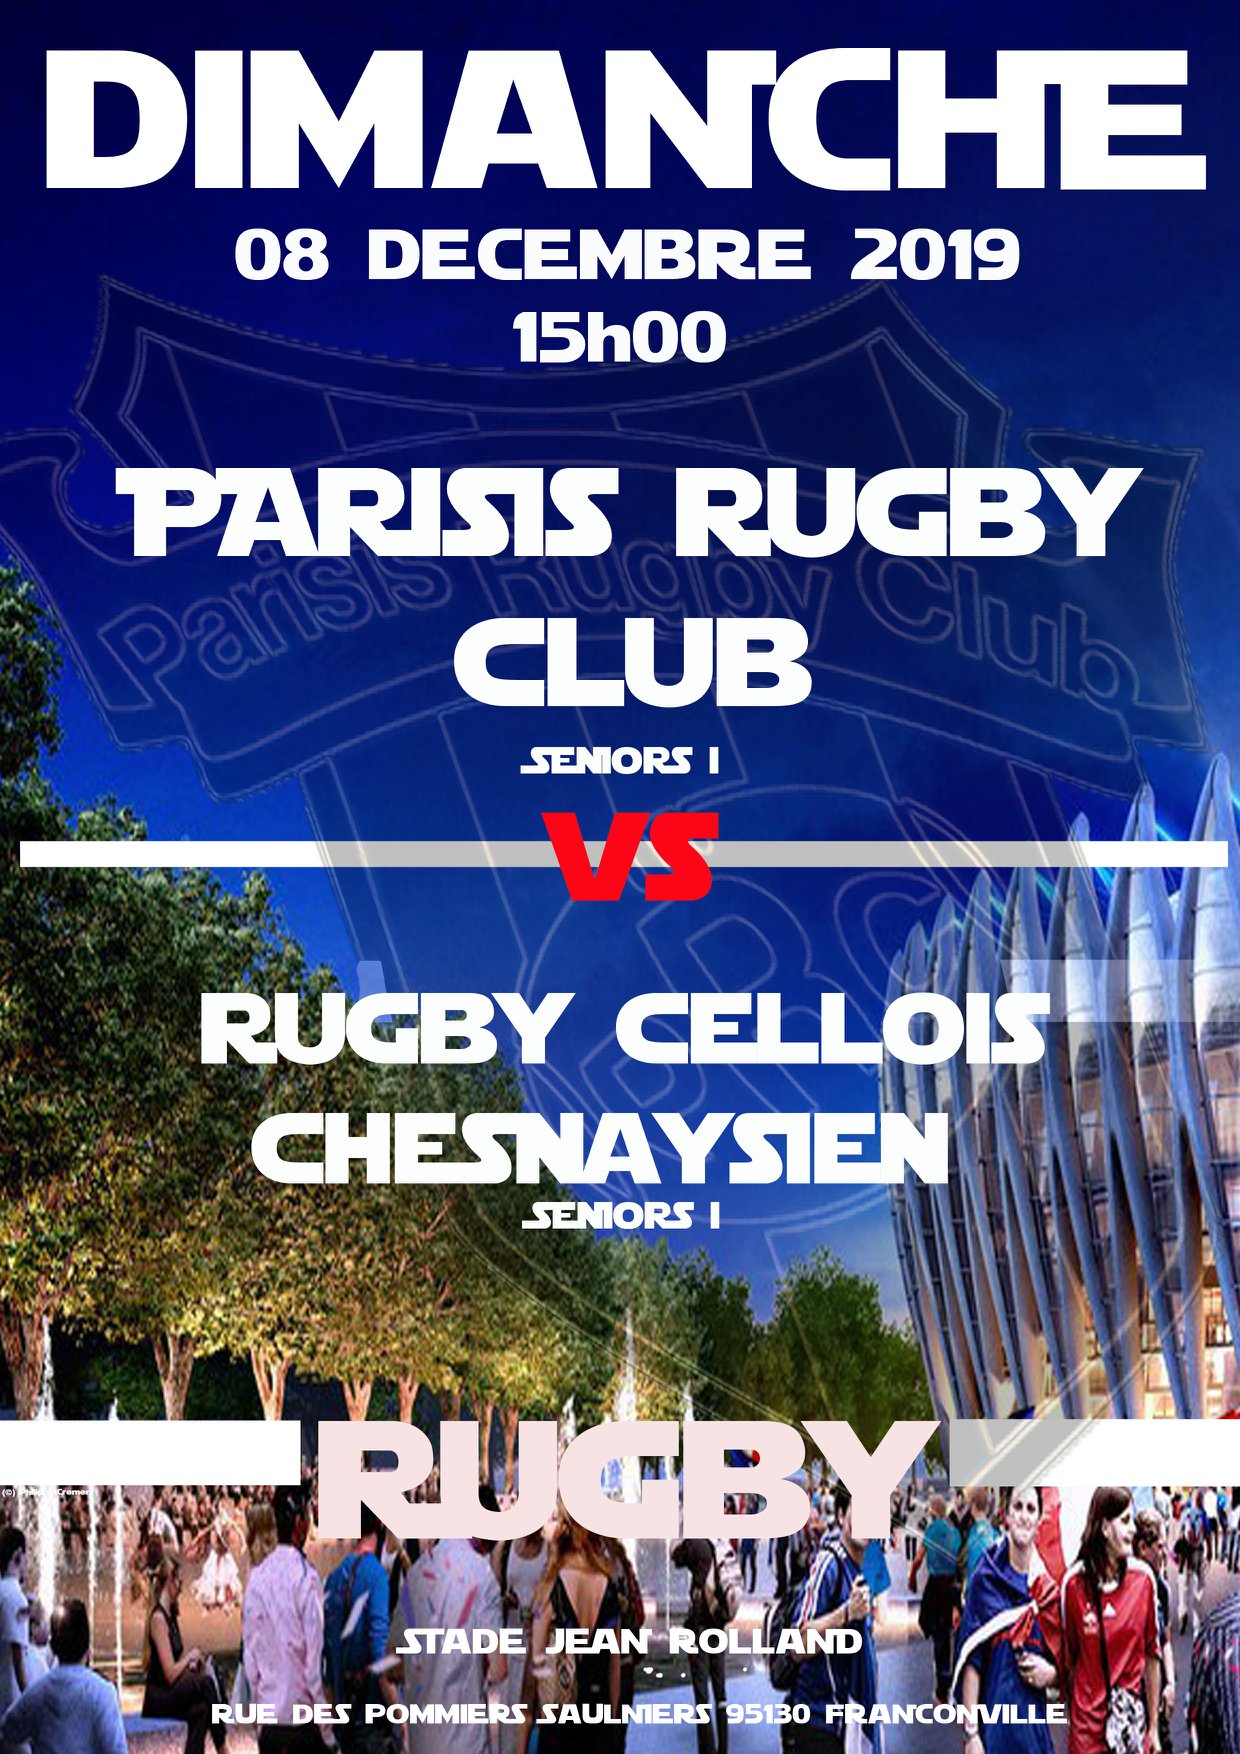 Parisis Rugby Club - Rugby Cellois Chesnaysien